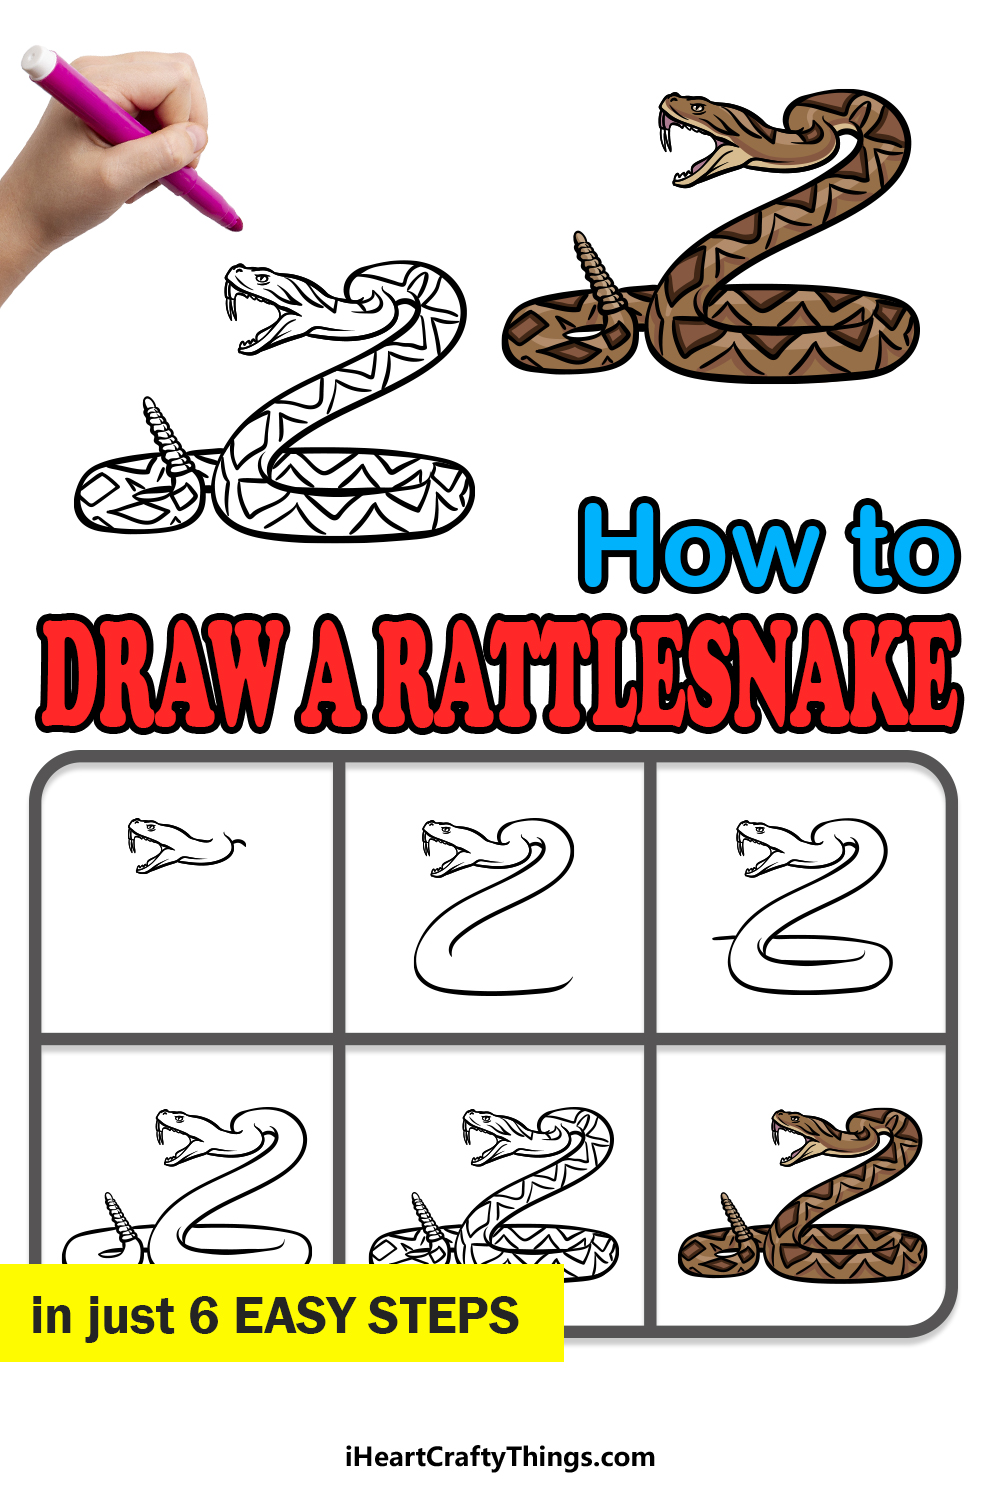 how to draw a rattlesnake in 6 easy steps